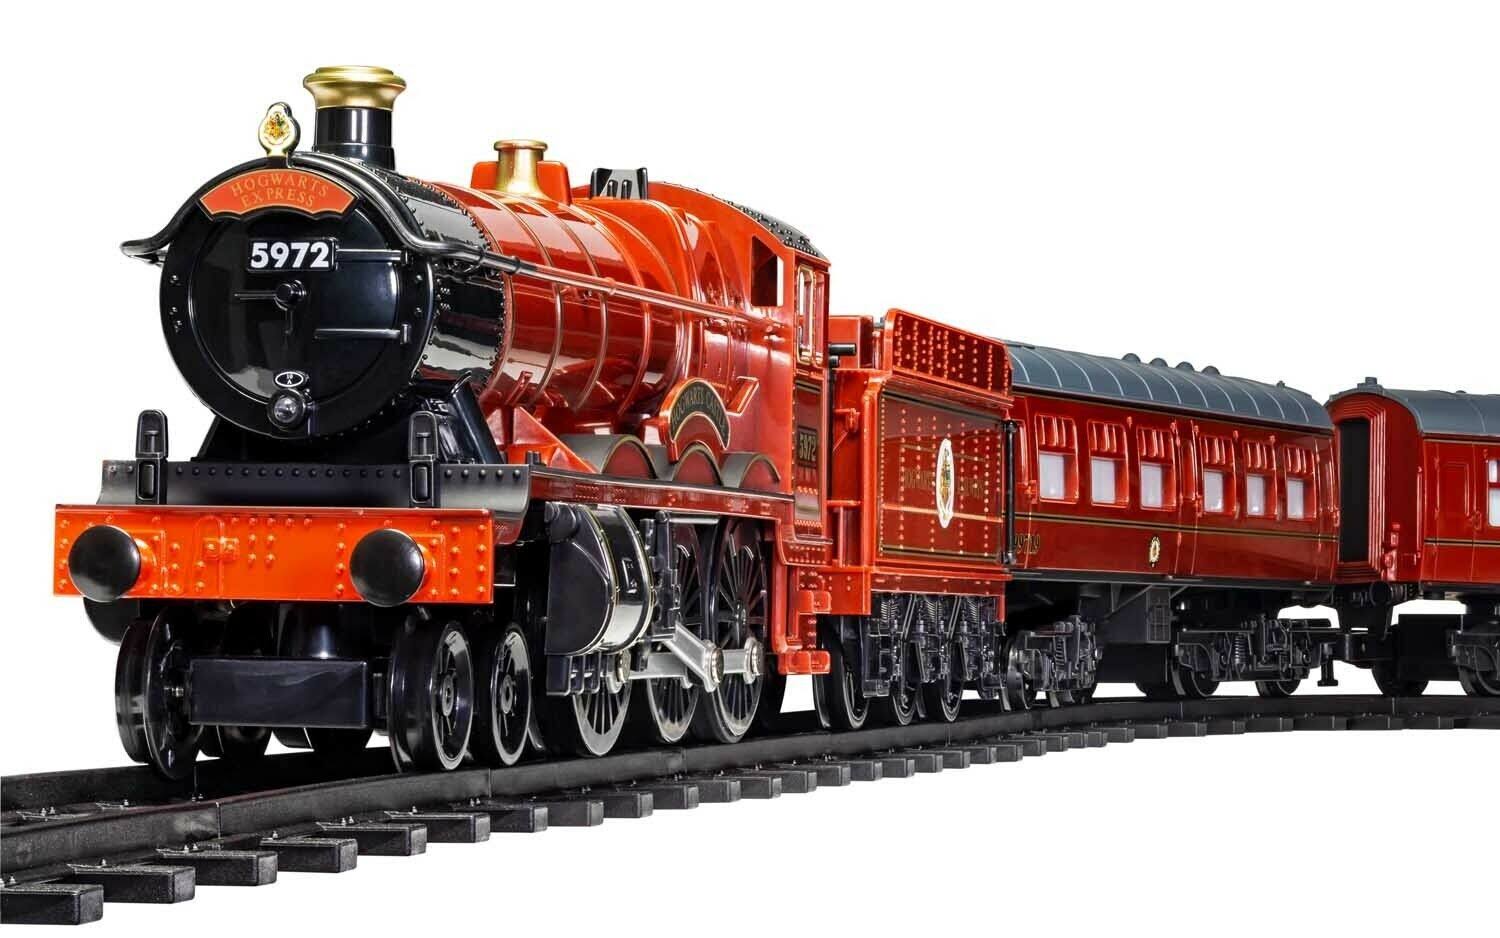 Lionel - Hogwarts Express - Ready to Play Train Set